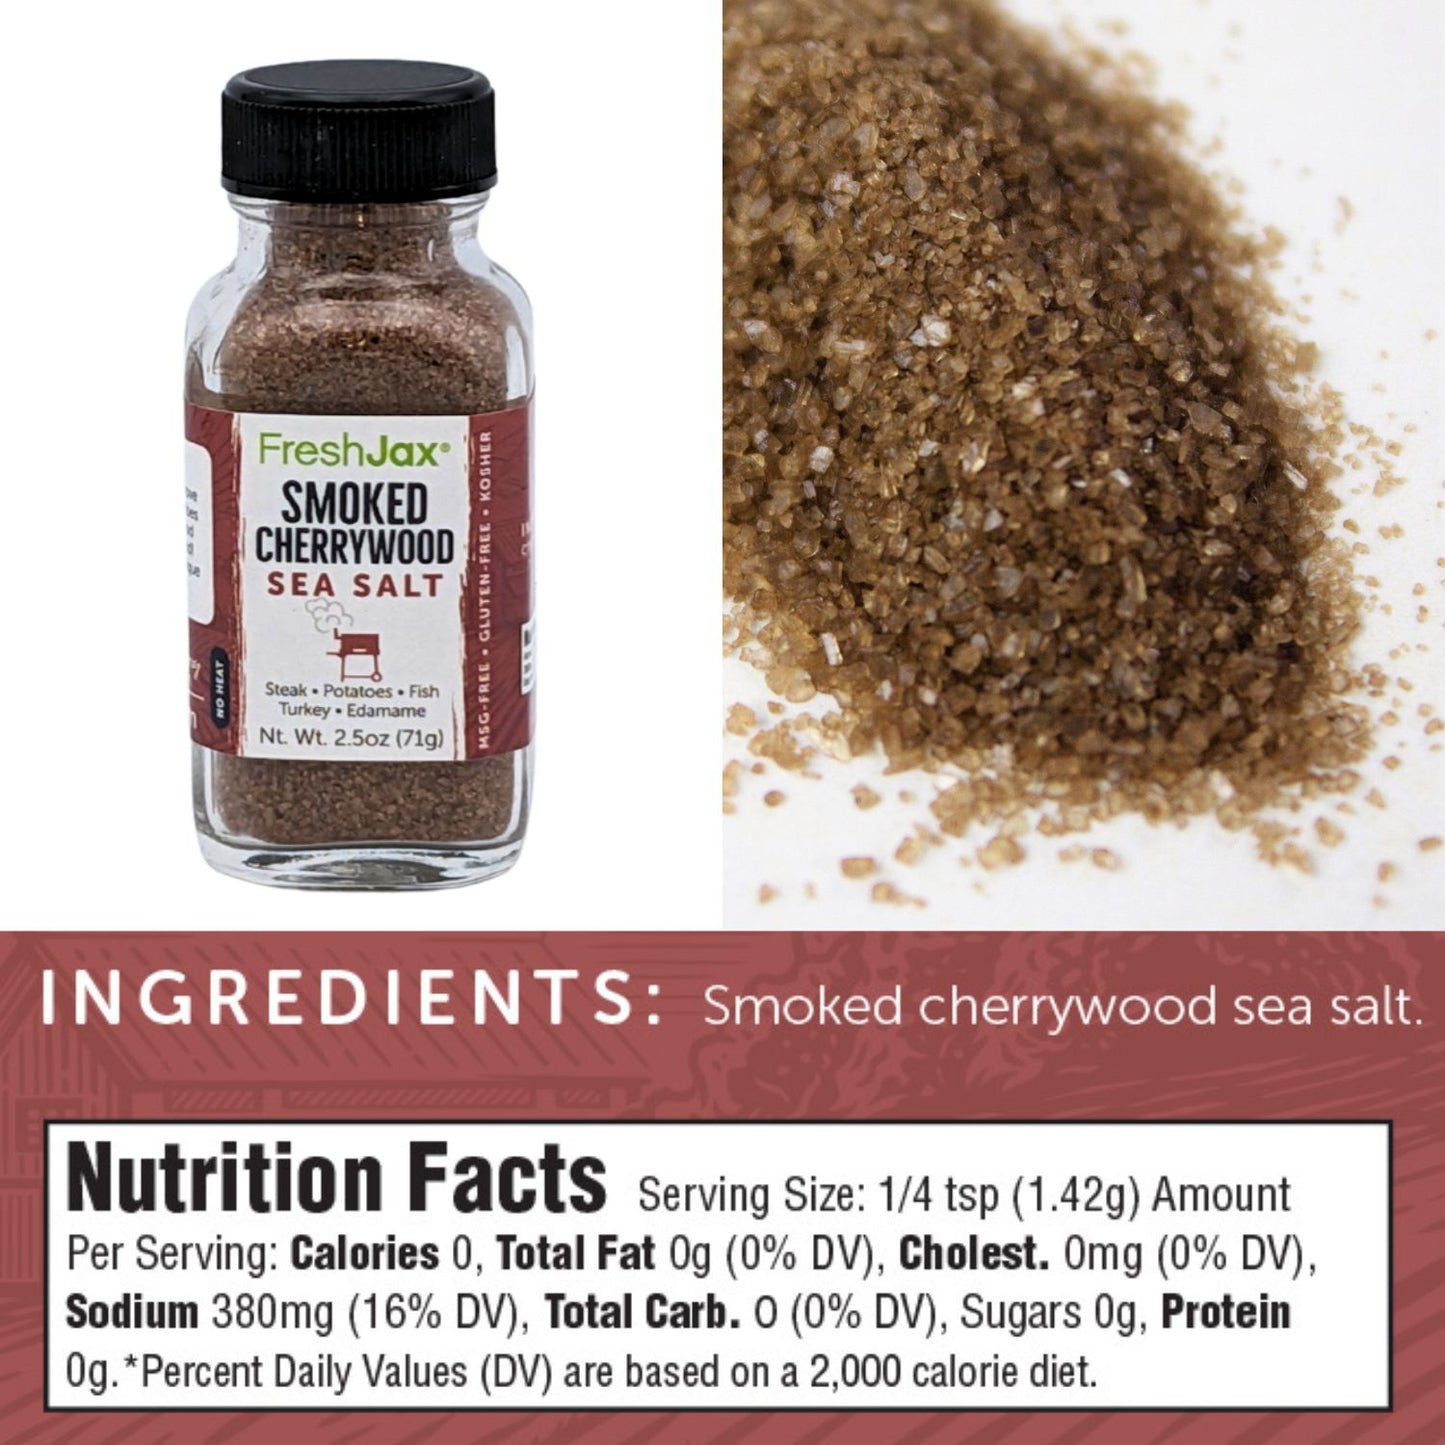 FreshJax Smoked Cherrywood Ingredient and Nutritional Information